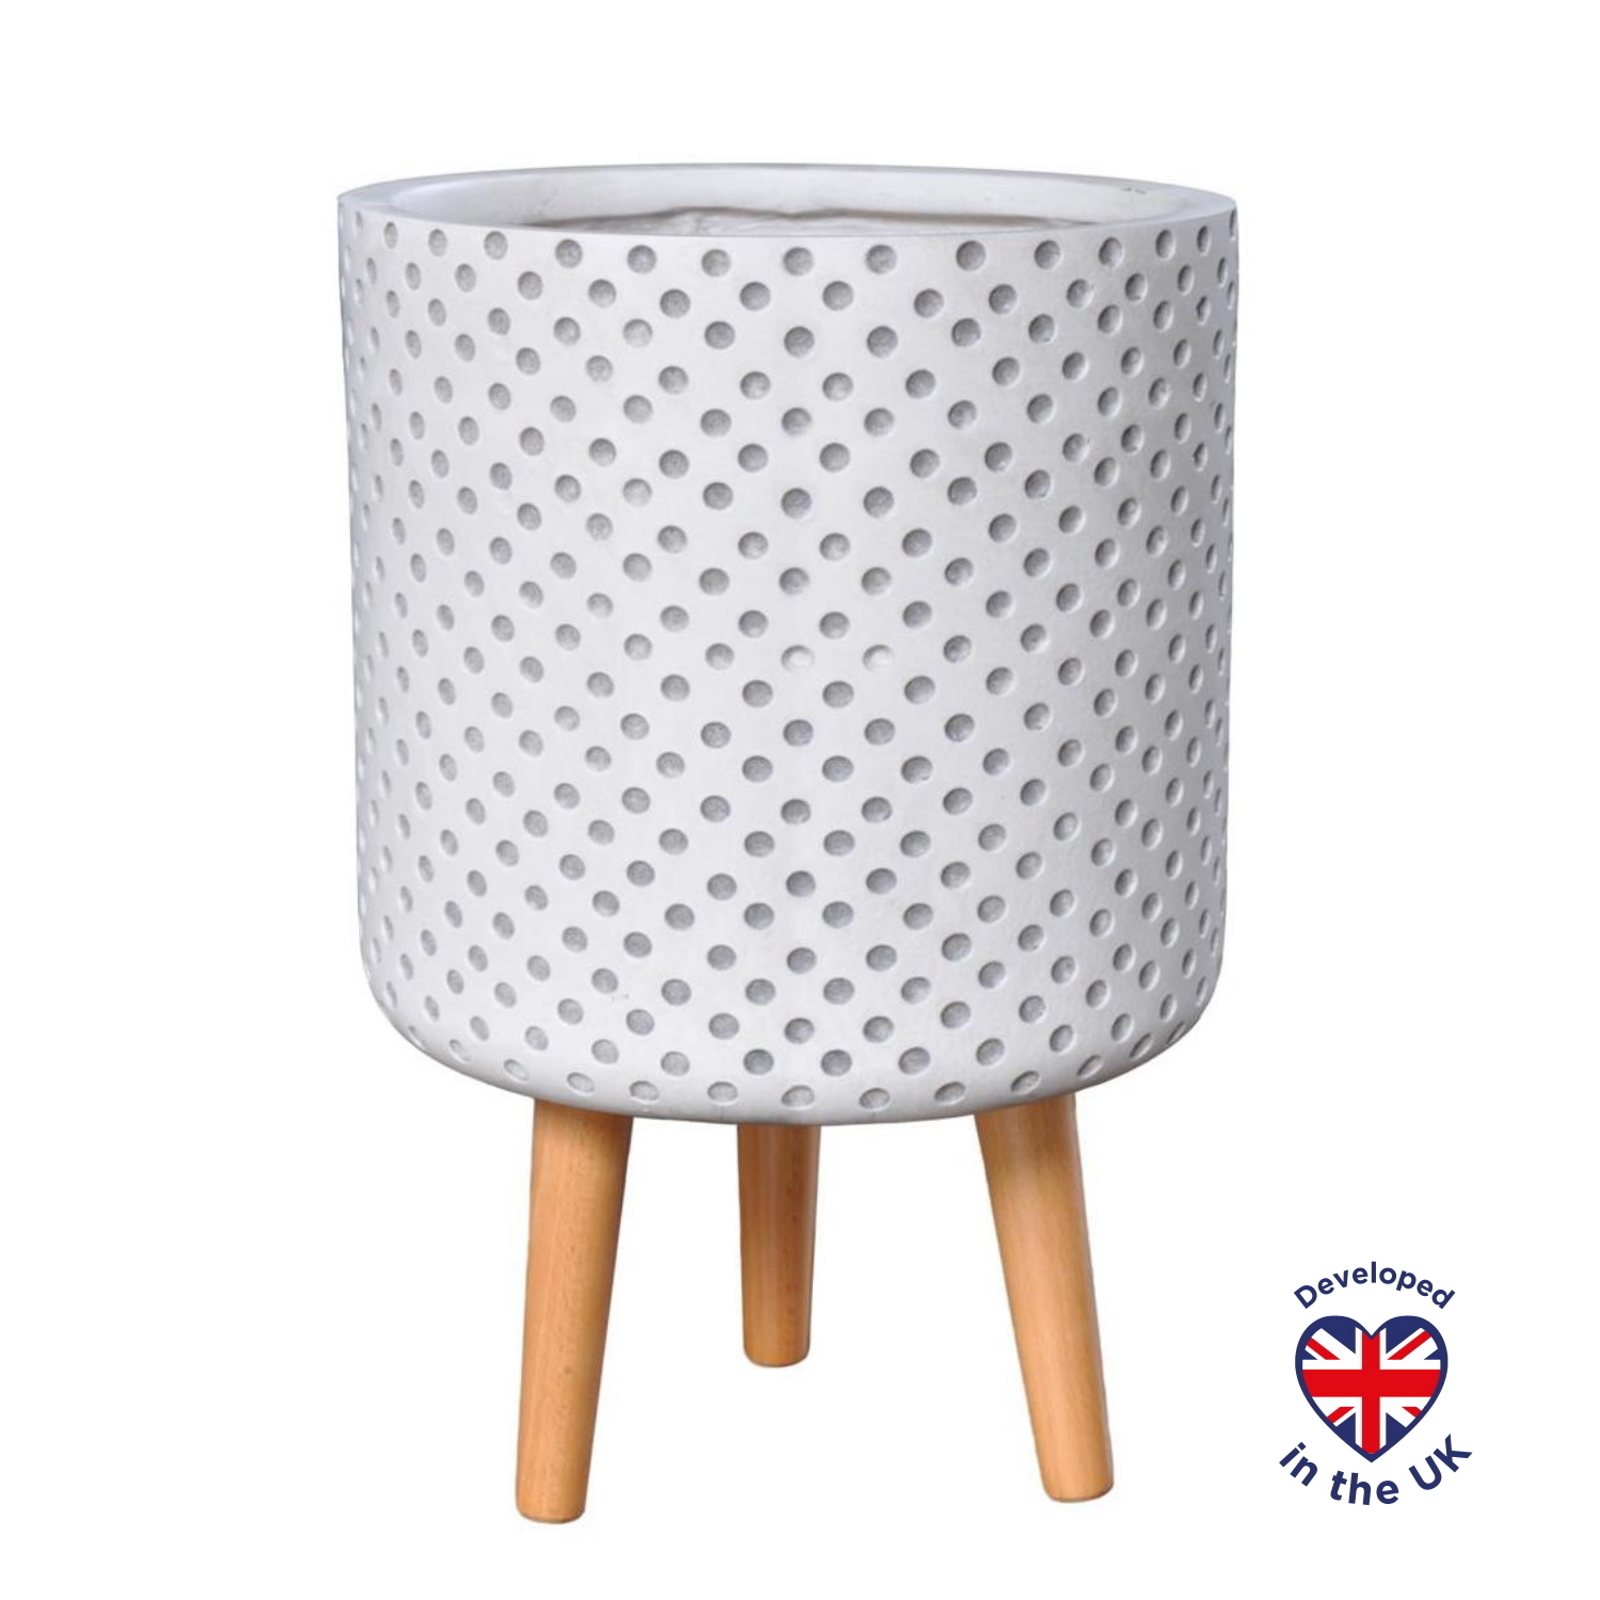 Dotted Style White Cylinder Indoor Planter with Legs D30.5 H46 cm, 18.5 ltrs Cap.